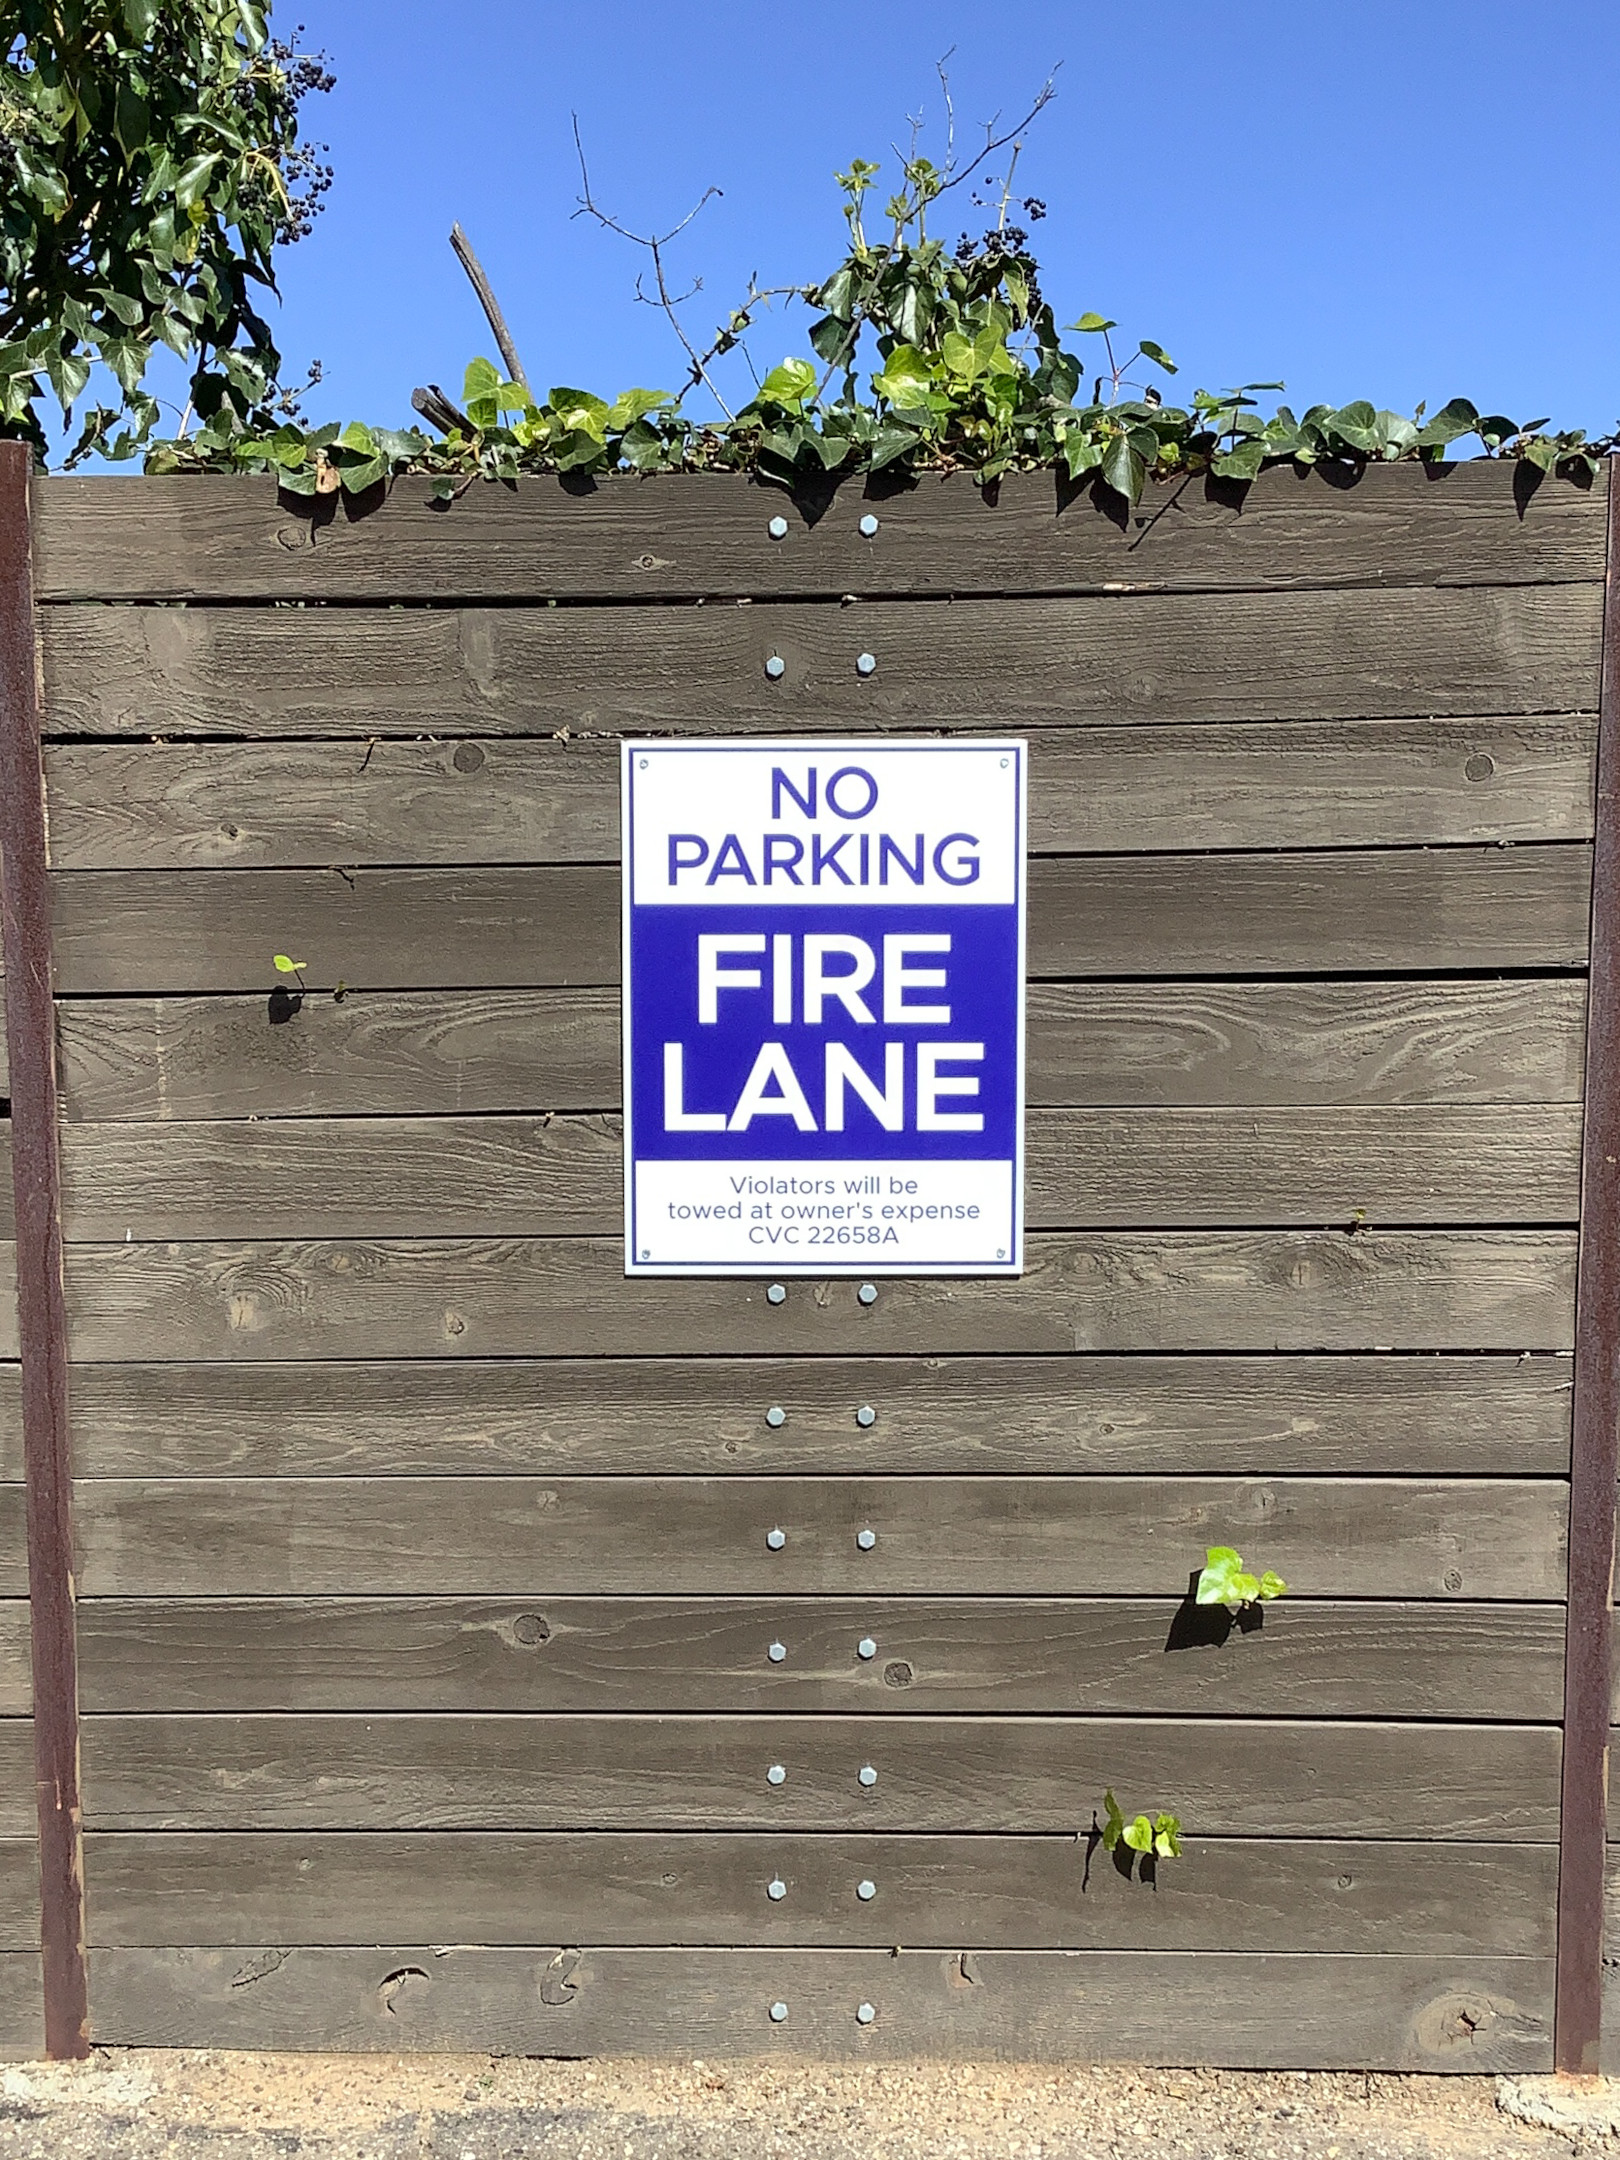 When all the signs are seen together on the property, it can make a real difference in the perception of the property.